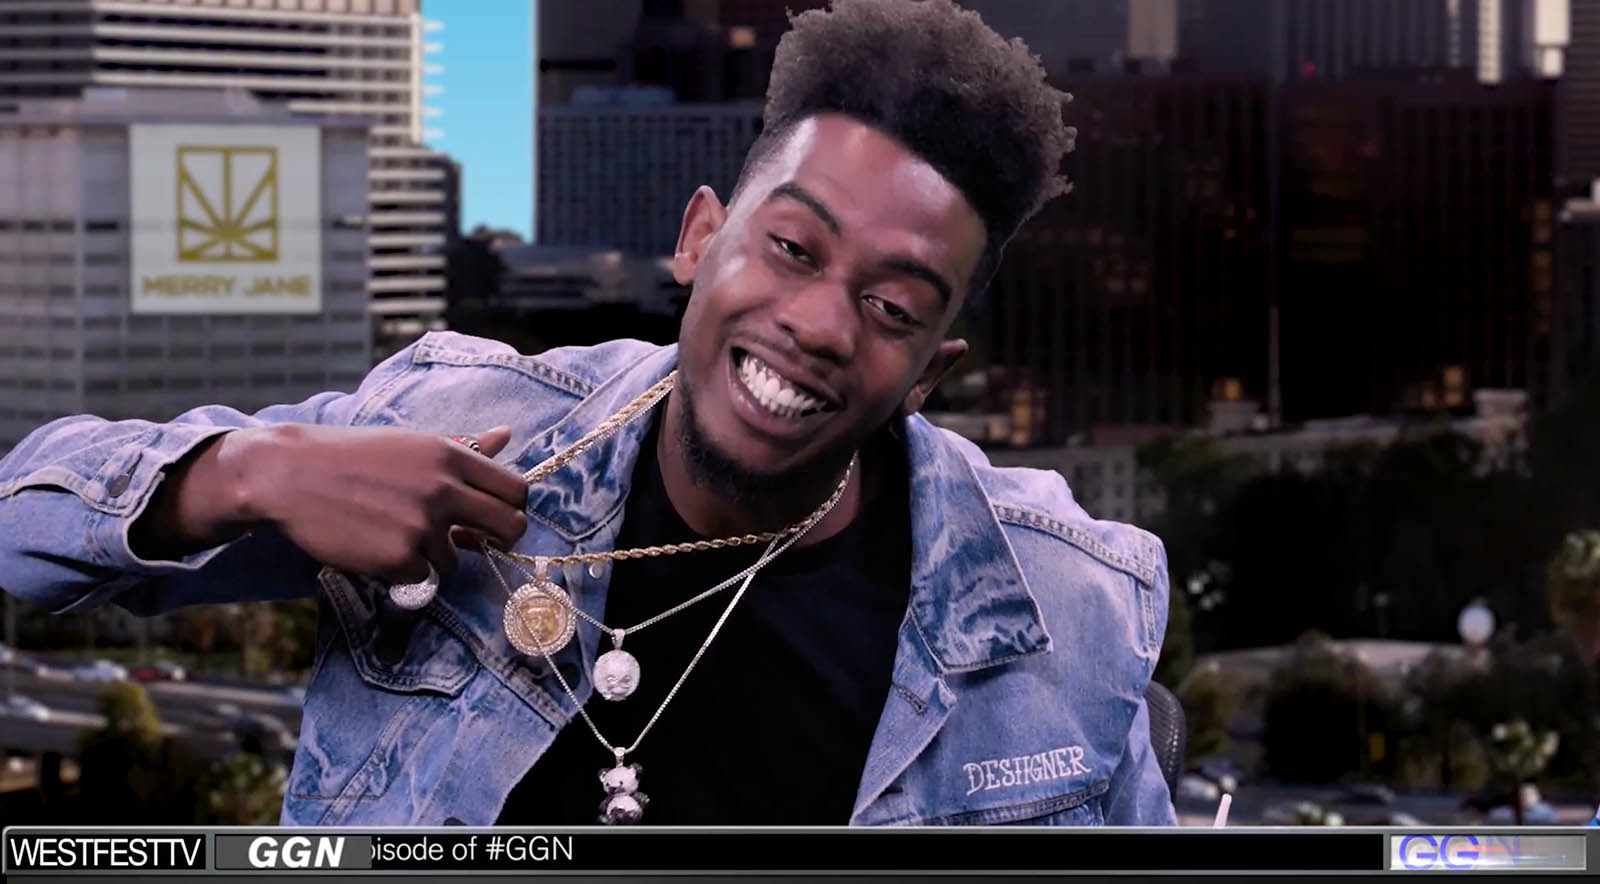 The Surprising Reason Behind Desiigner’s Infectious Positivity